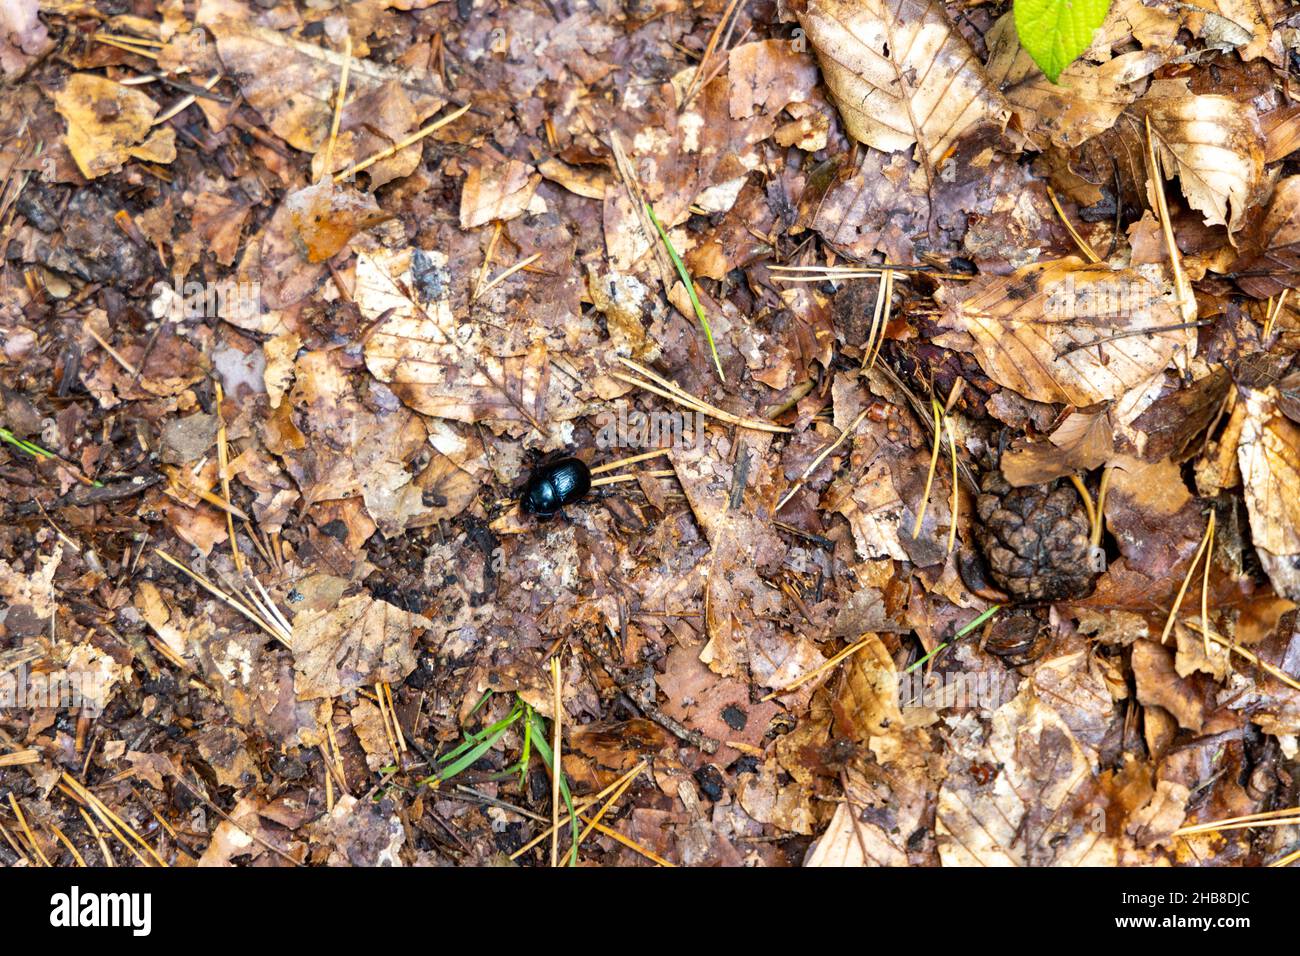 a black dung beetle in search of food or building material Stock Photo